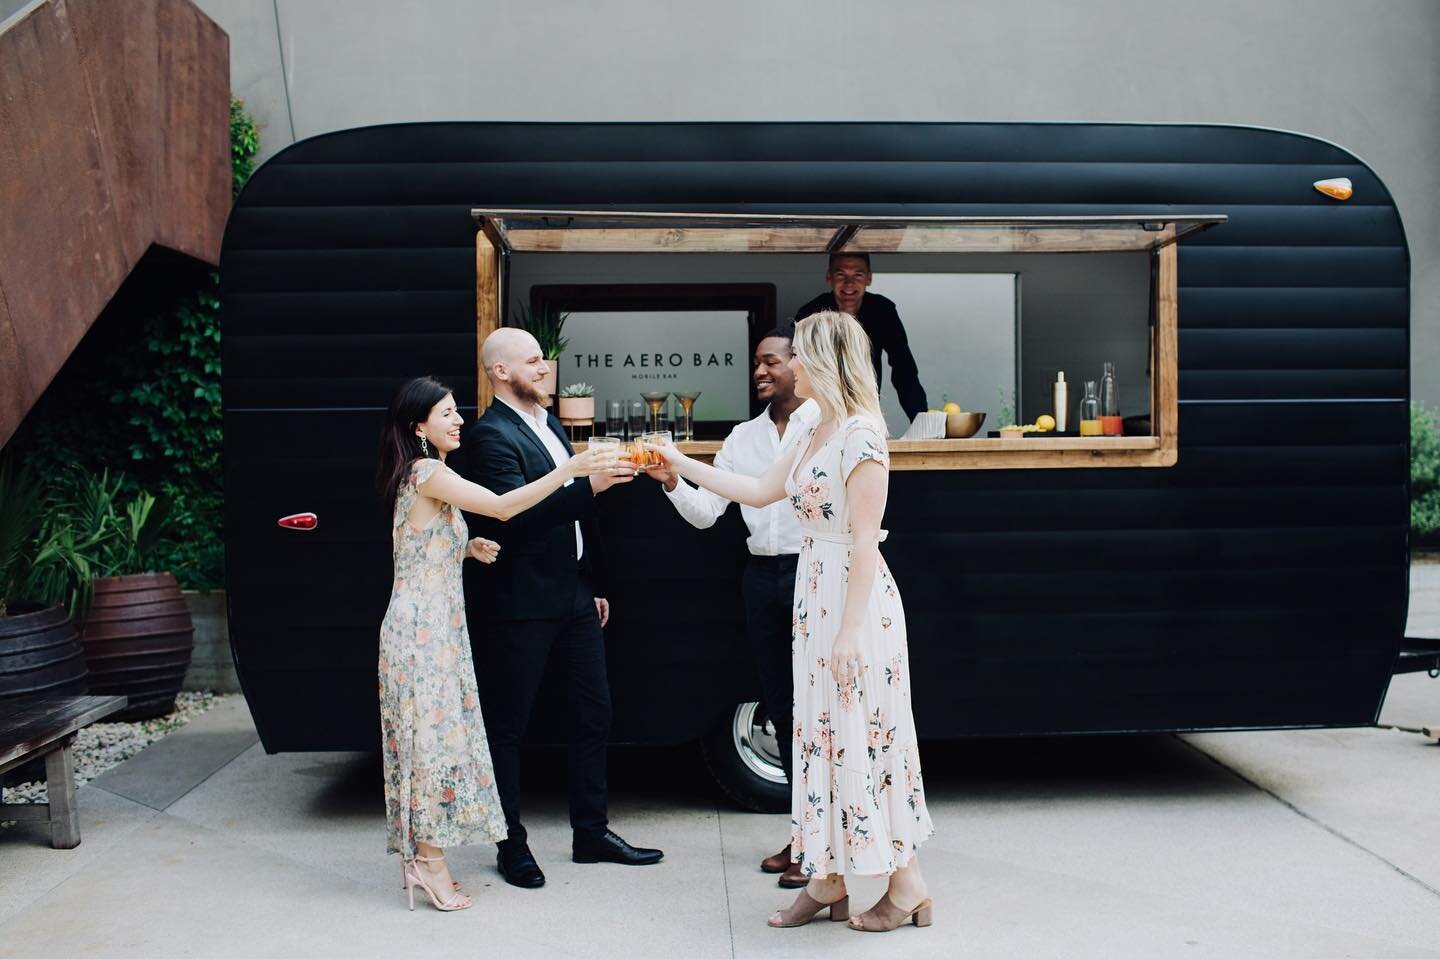 Meet Henry. Our largest mobile bar in our fleet. Henry can service up to 500 guests, and his super sleek design adds just the right touch to any event! ✨